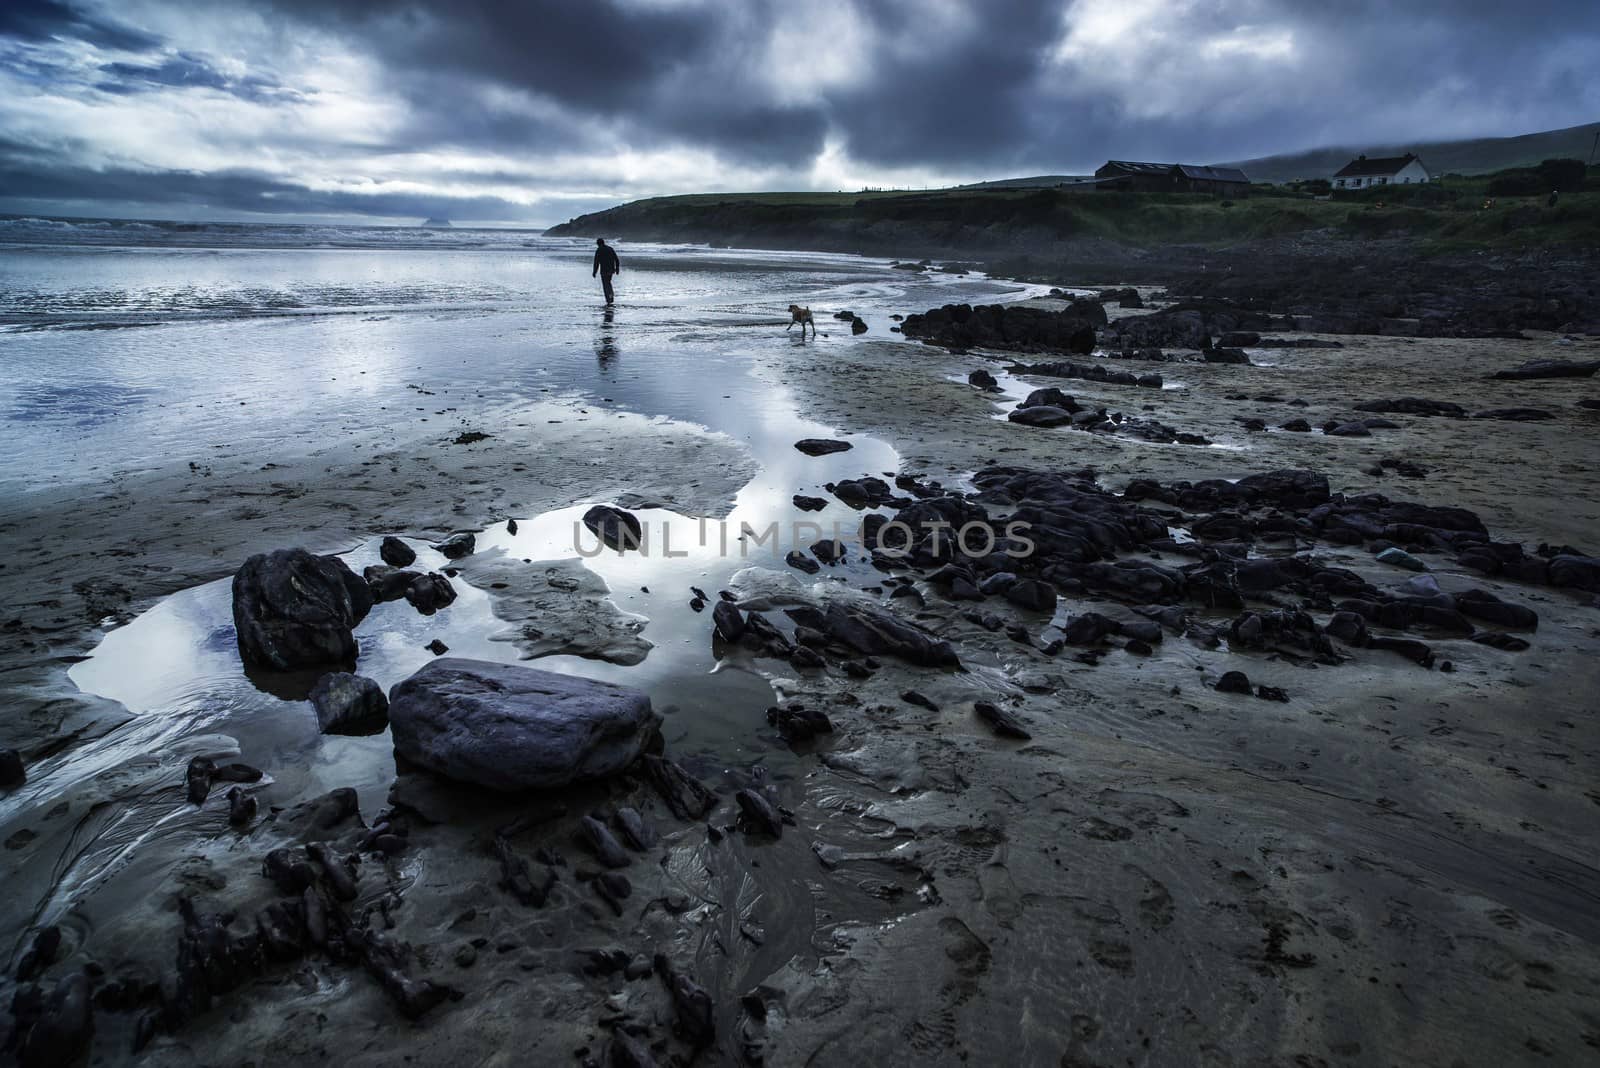 Atmospheric scene of a man and dog on a beach in Ireland in front of Skelly Island with an approaching storm with dramatic dark threatening clouds